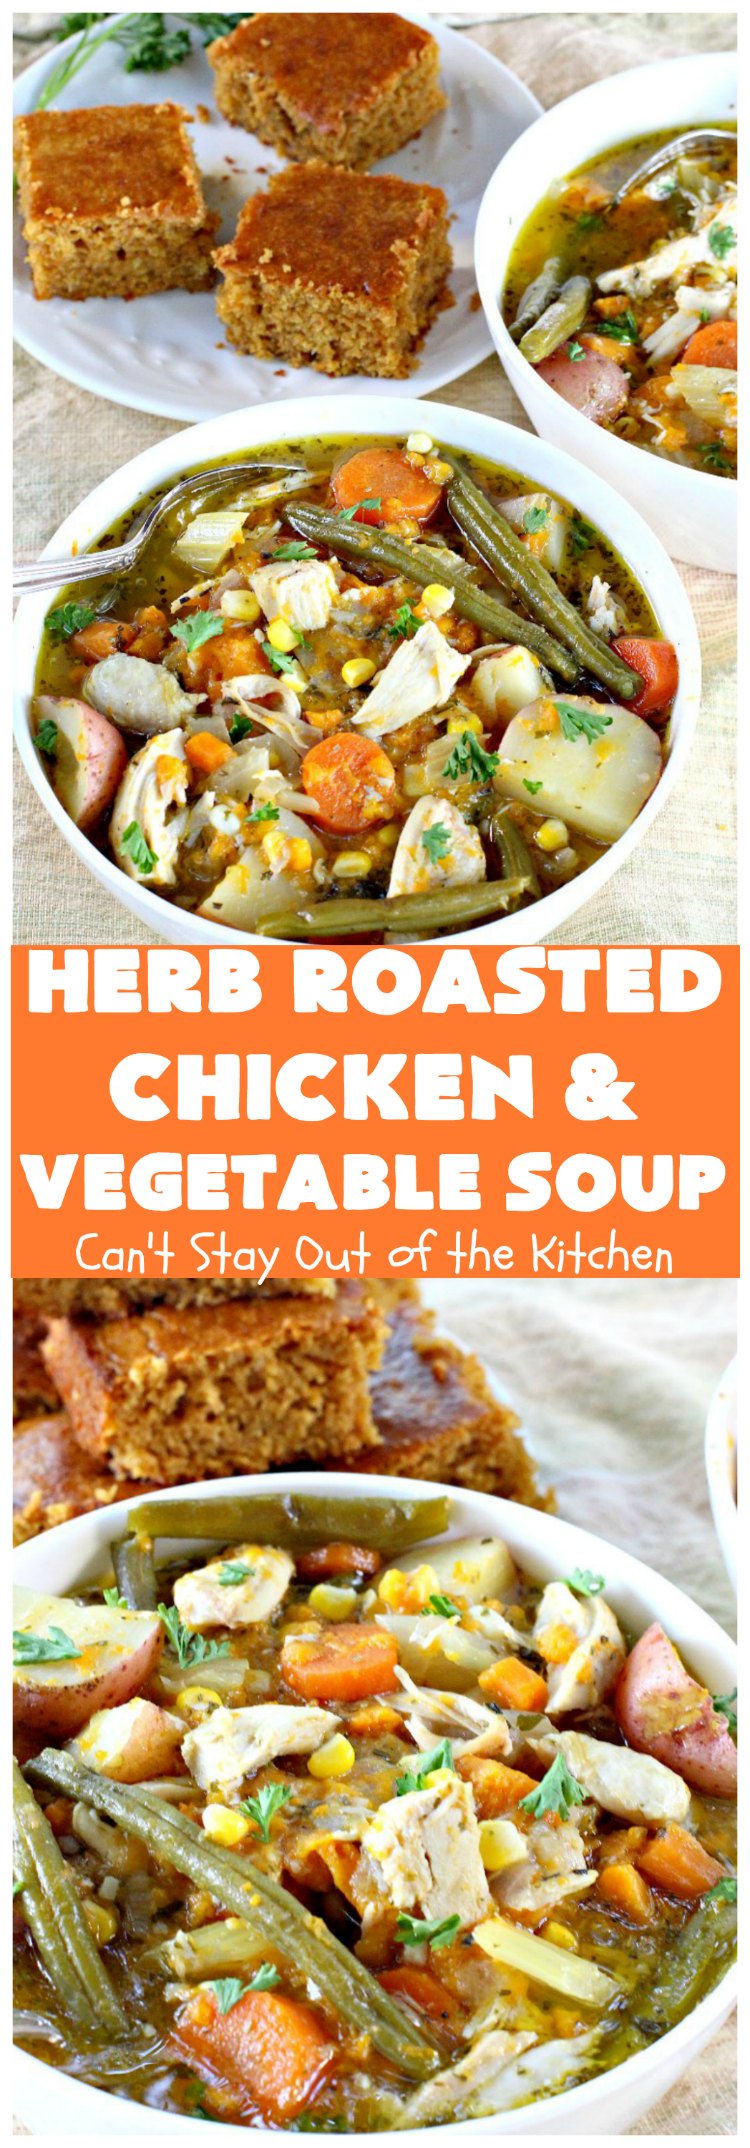 Herb Roasted Chicken and Vegetable Soup | Can't Stay Out of the Kitchen